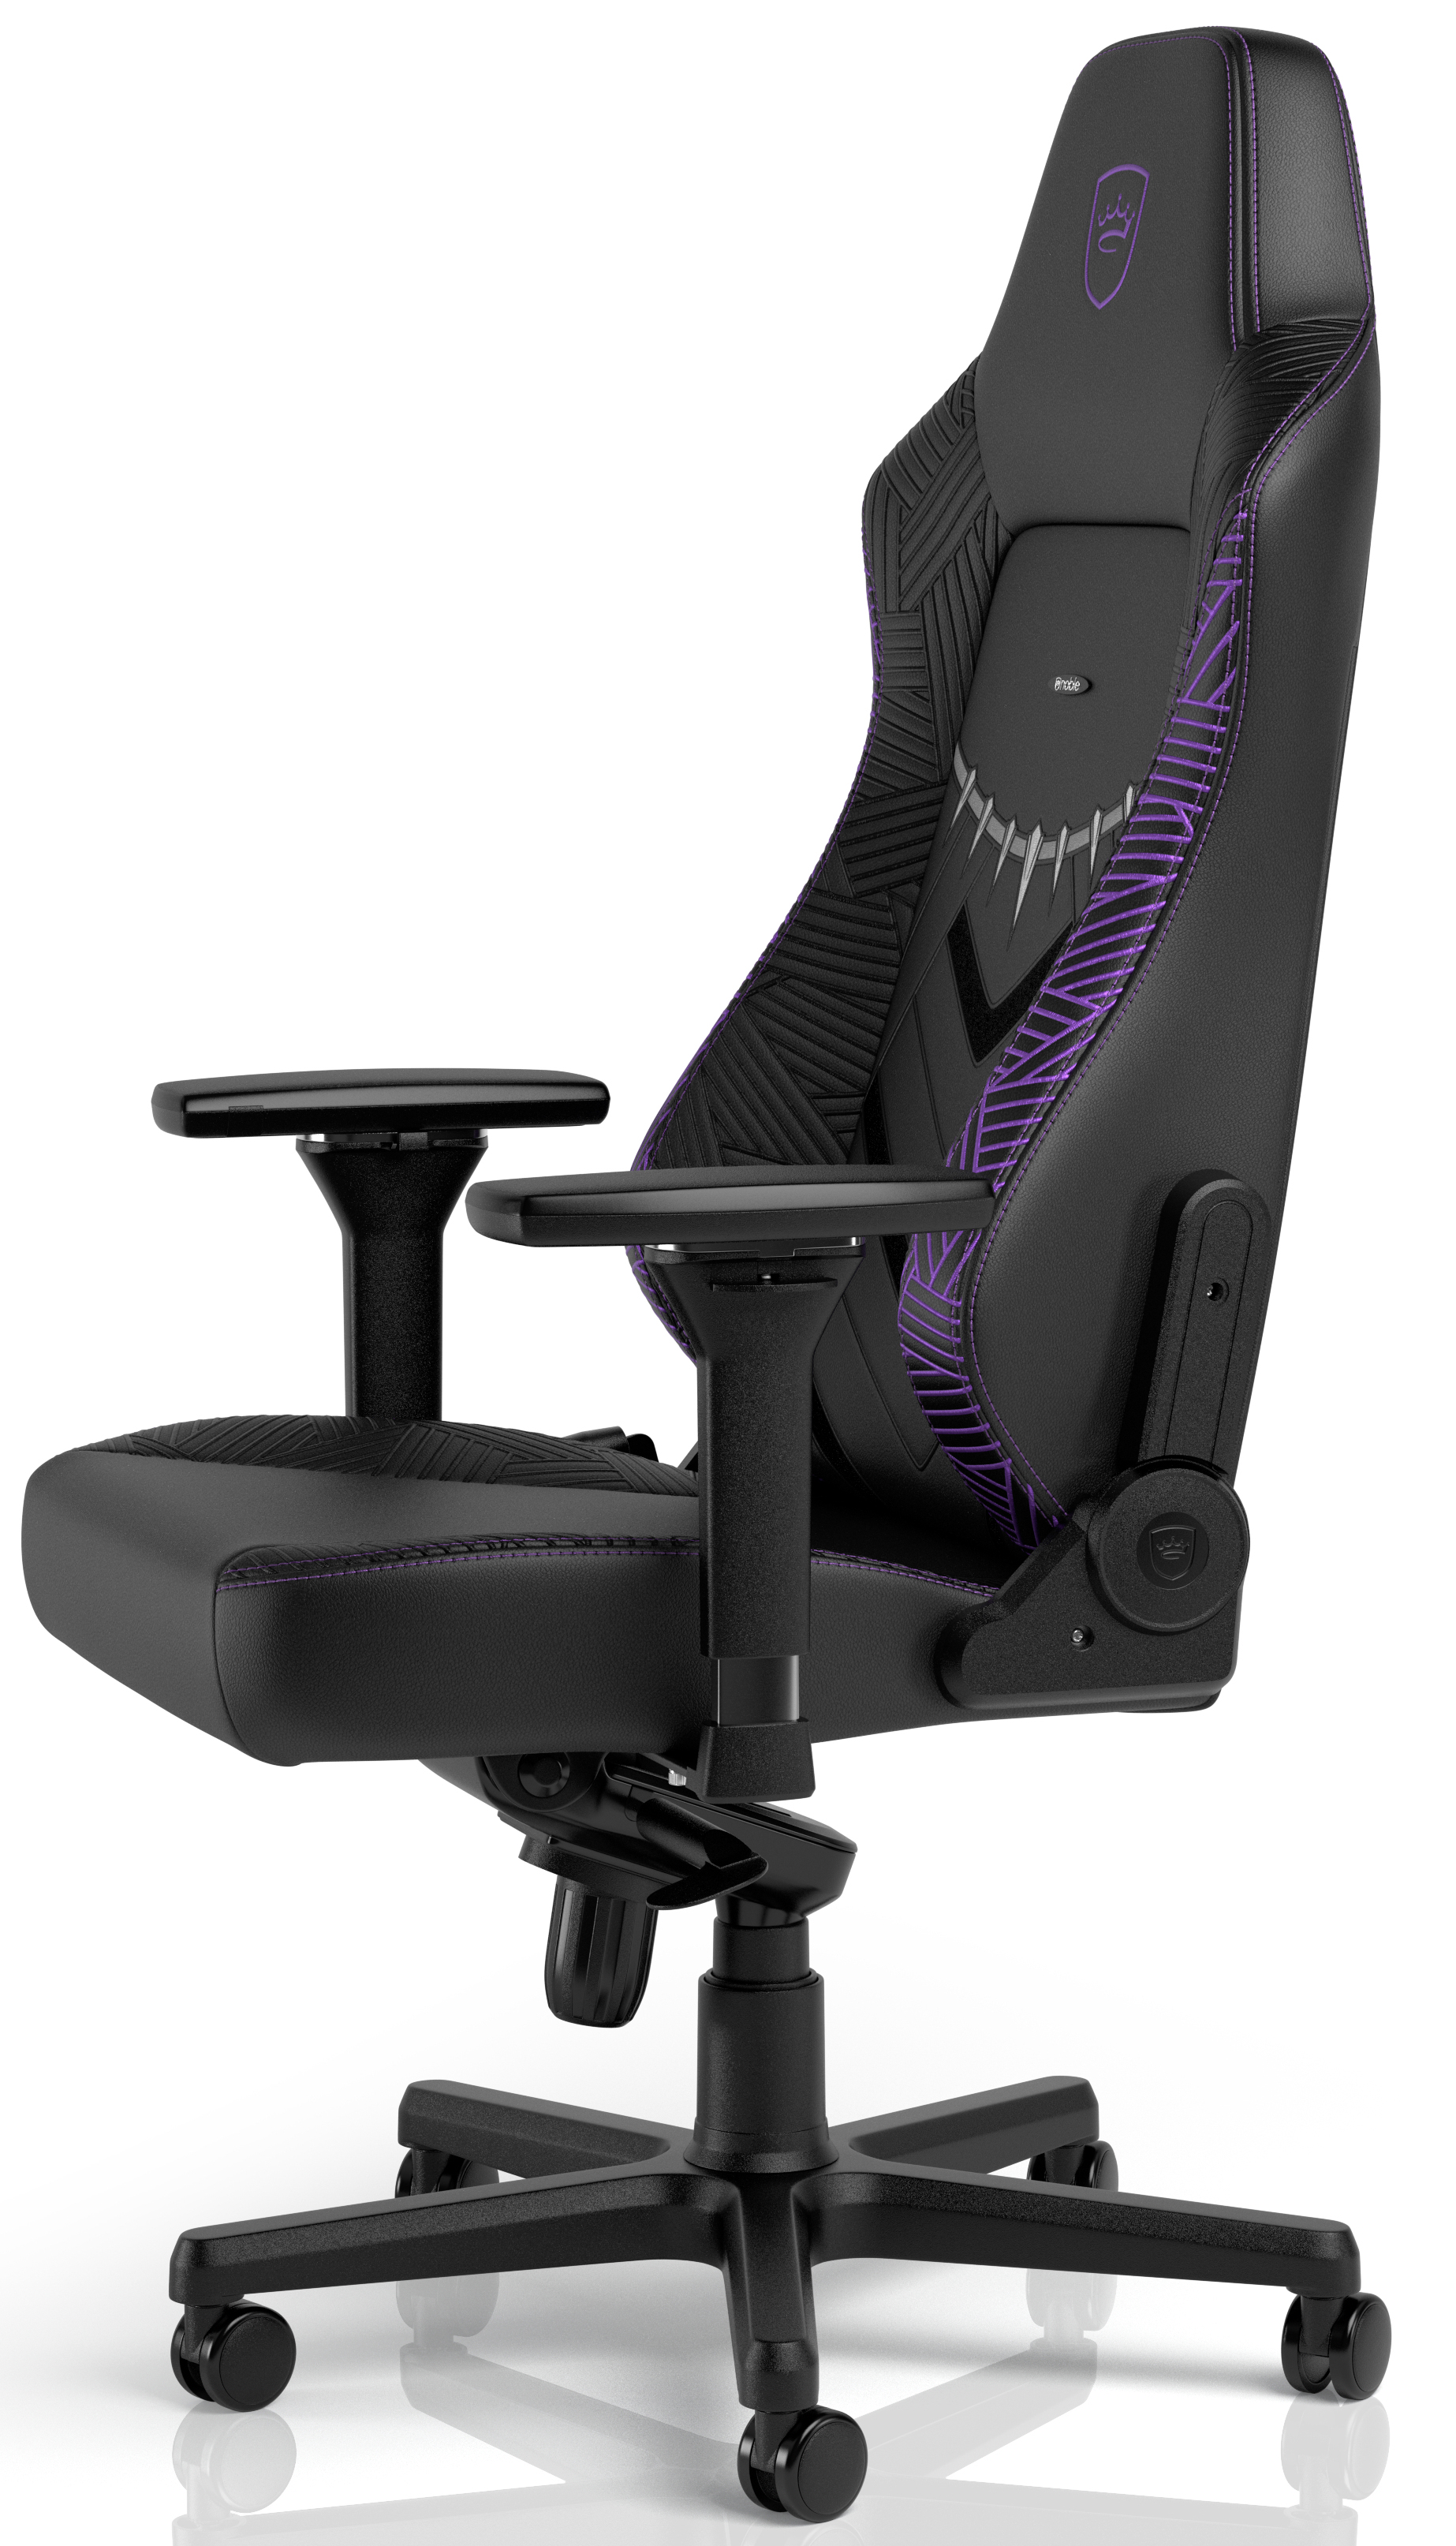 noblechairs - ** B Grade ** Silla noblechairs HERO - Black Panther Edition